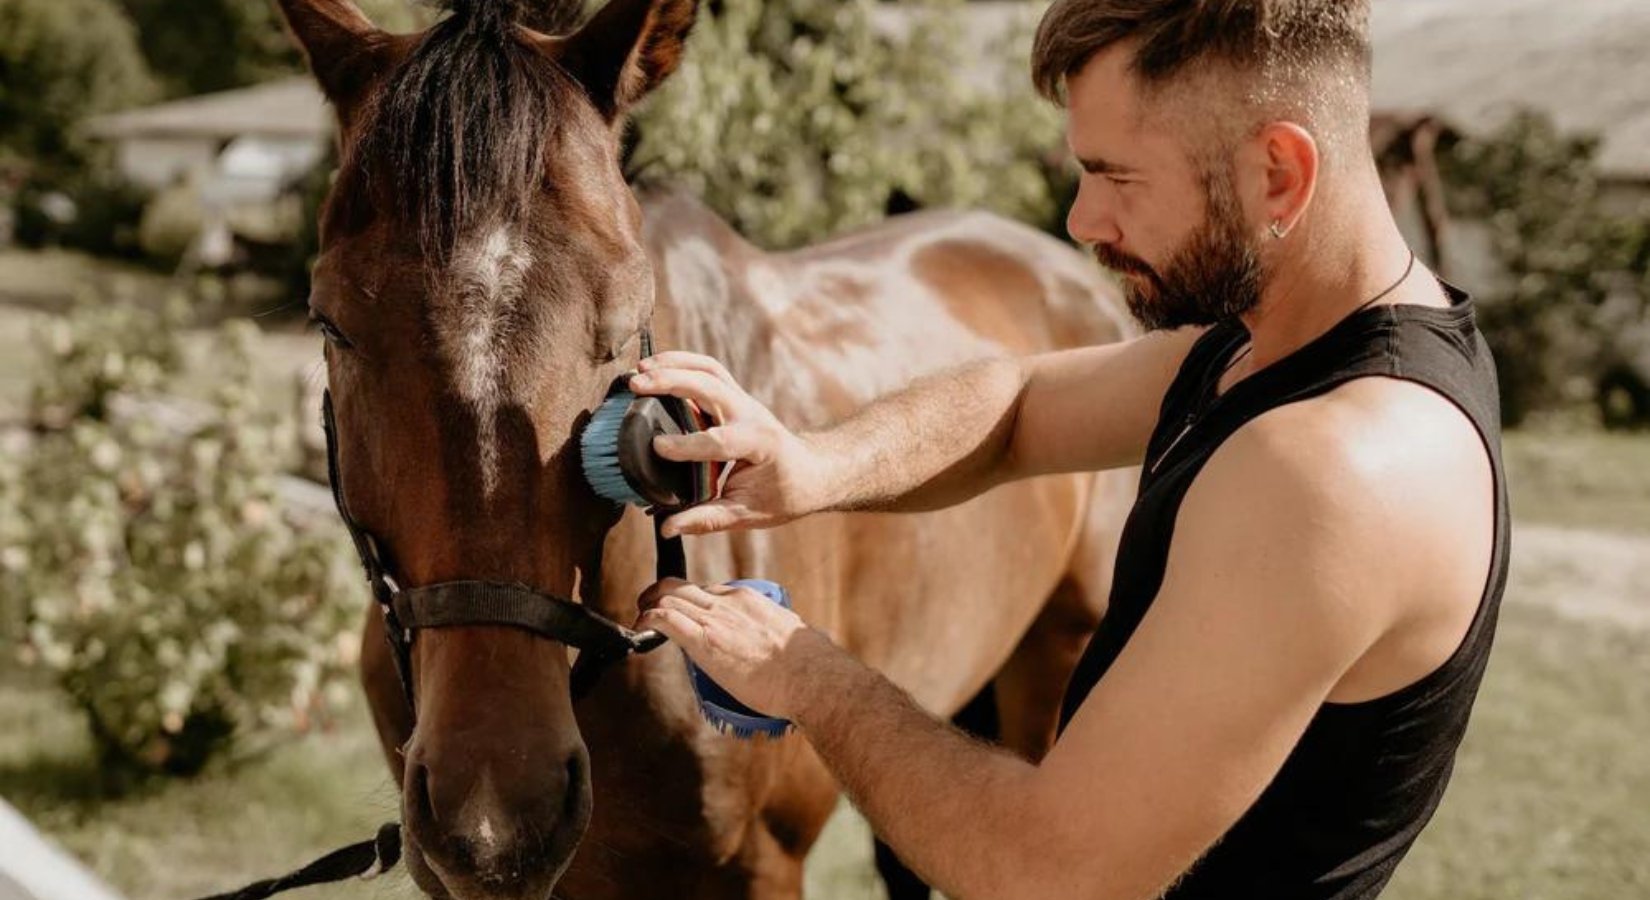 Elevate Your Equine Care with the Complete Range of HAAS Horse Grooming Brushes - Horse Cleaning Masters Of Shampoos ™